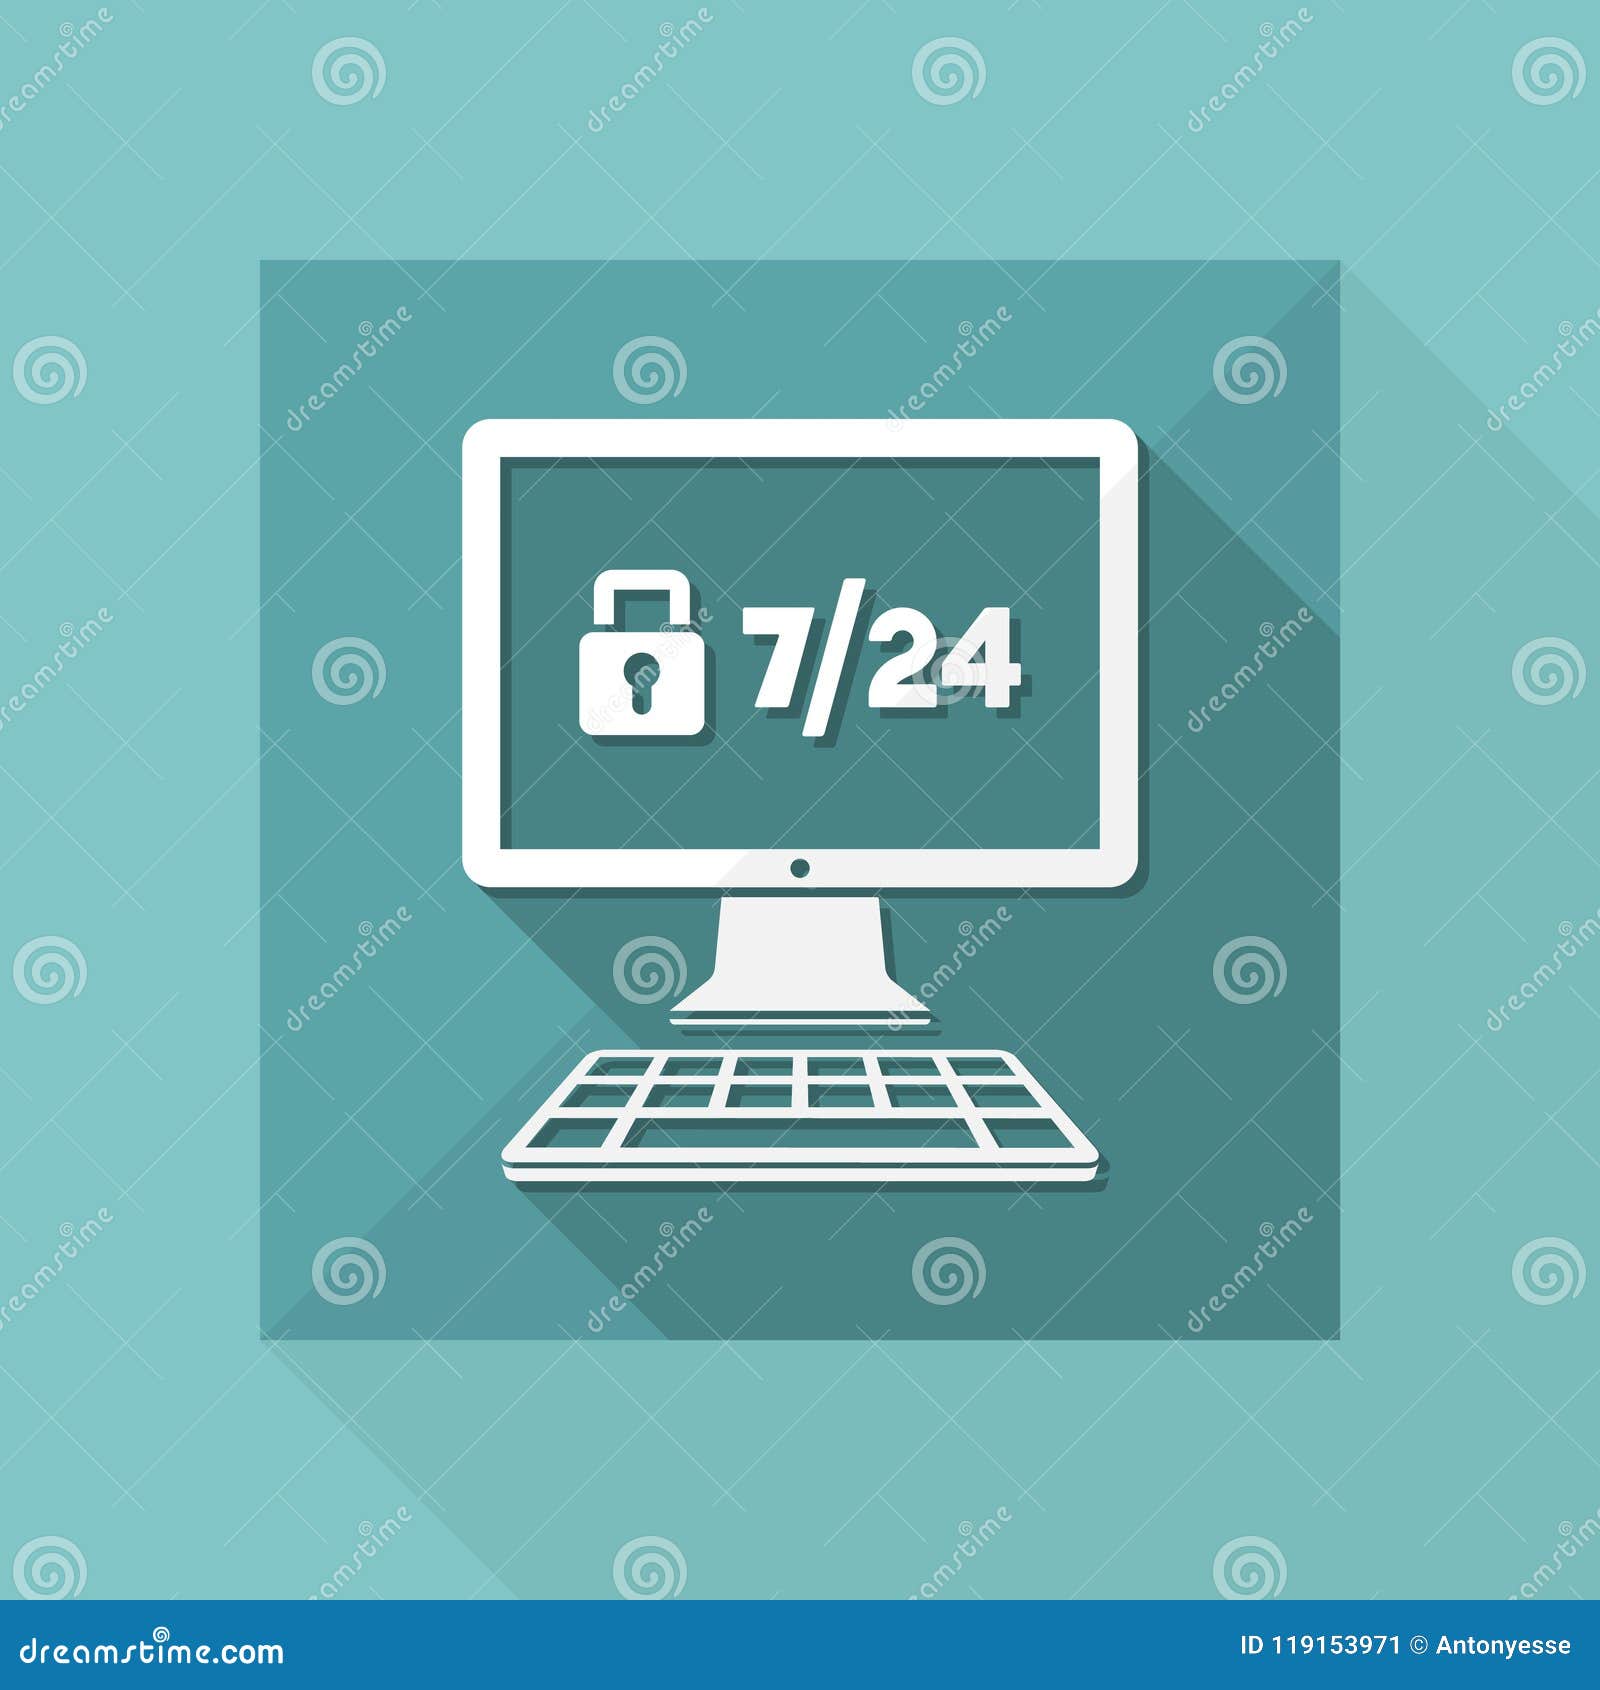 7/24 Computer Protection - Vector Flat Icon Stock Vector - Illustration ...